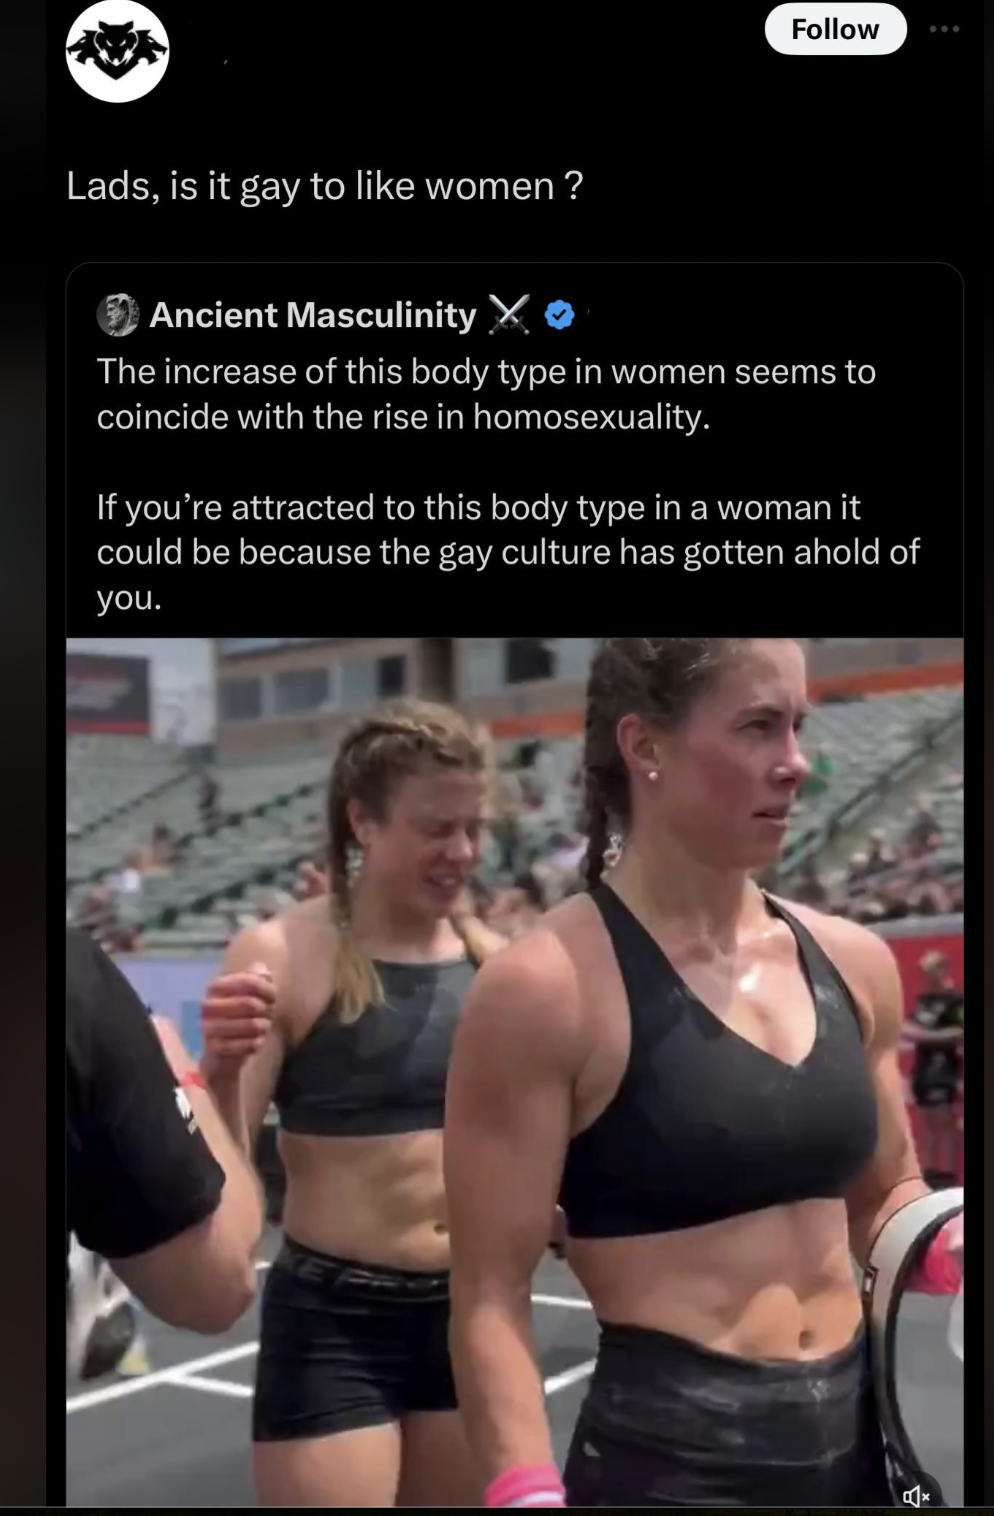 Woman - Lads, is it gay to women? Ancient Masculinity X The increase of this body type in women seems to coincide with the rise in homosexuality. If you're attracted to this body type in a woman it could be because the gay culture has gotten ahold of you.